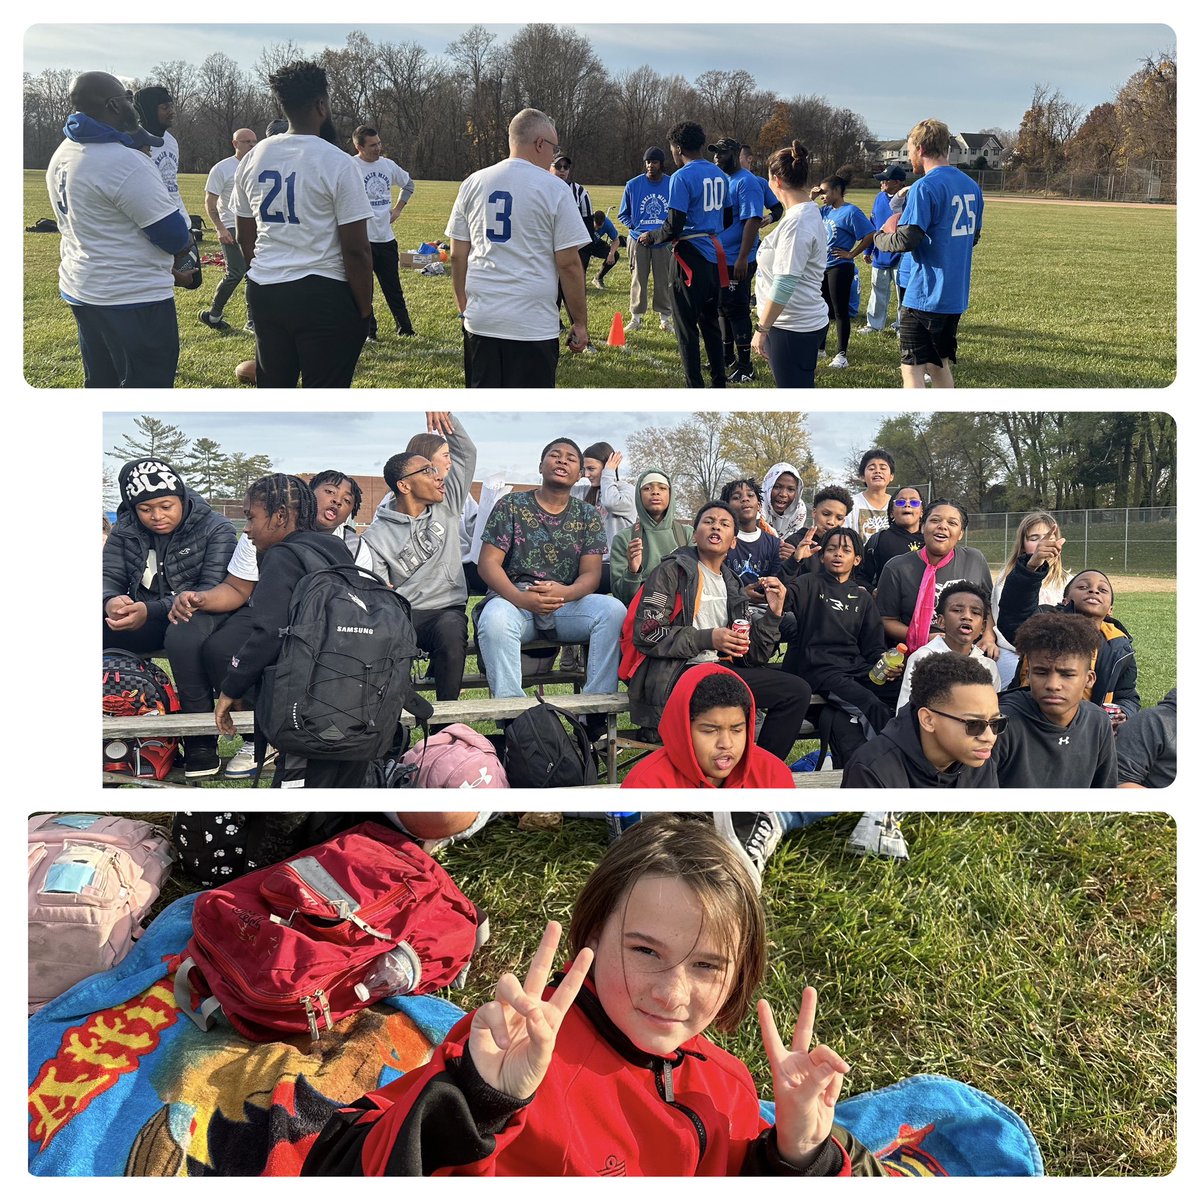 What a beautiful day for the annual FMS Turkey Bowl @FMS_BCPS! Thanks to everyone who played, supported, and cheered, and to @FMSDragonsPTA for selling concessions! @SchifferB @Fschrader1 @twelzant